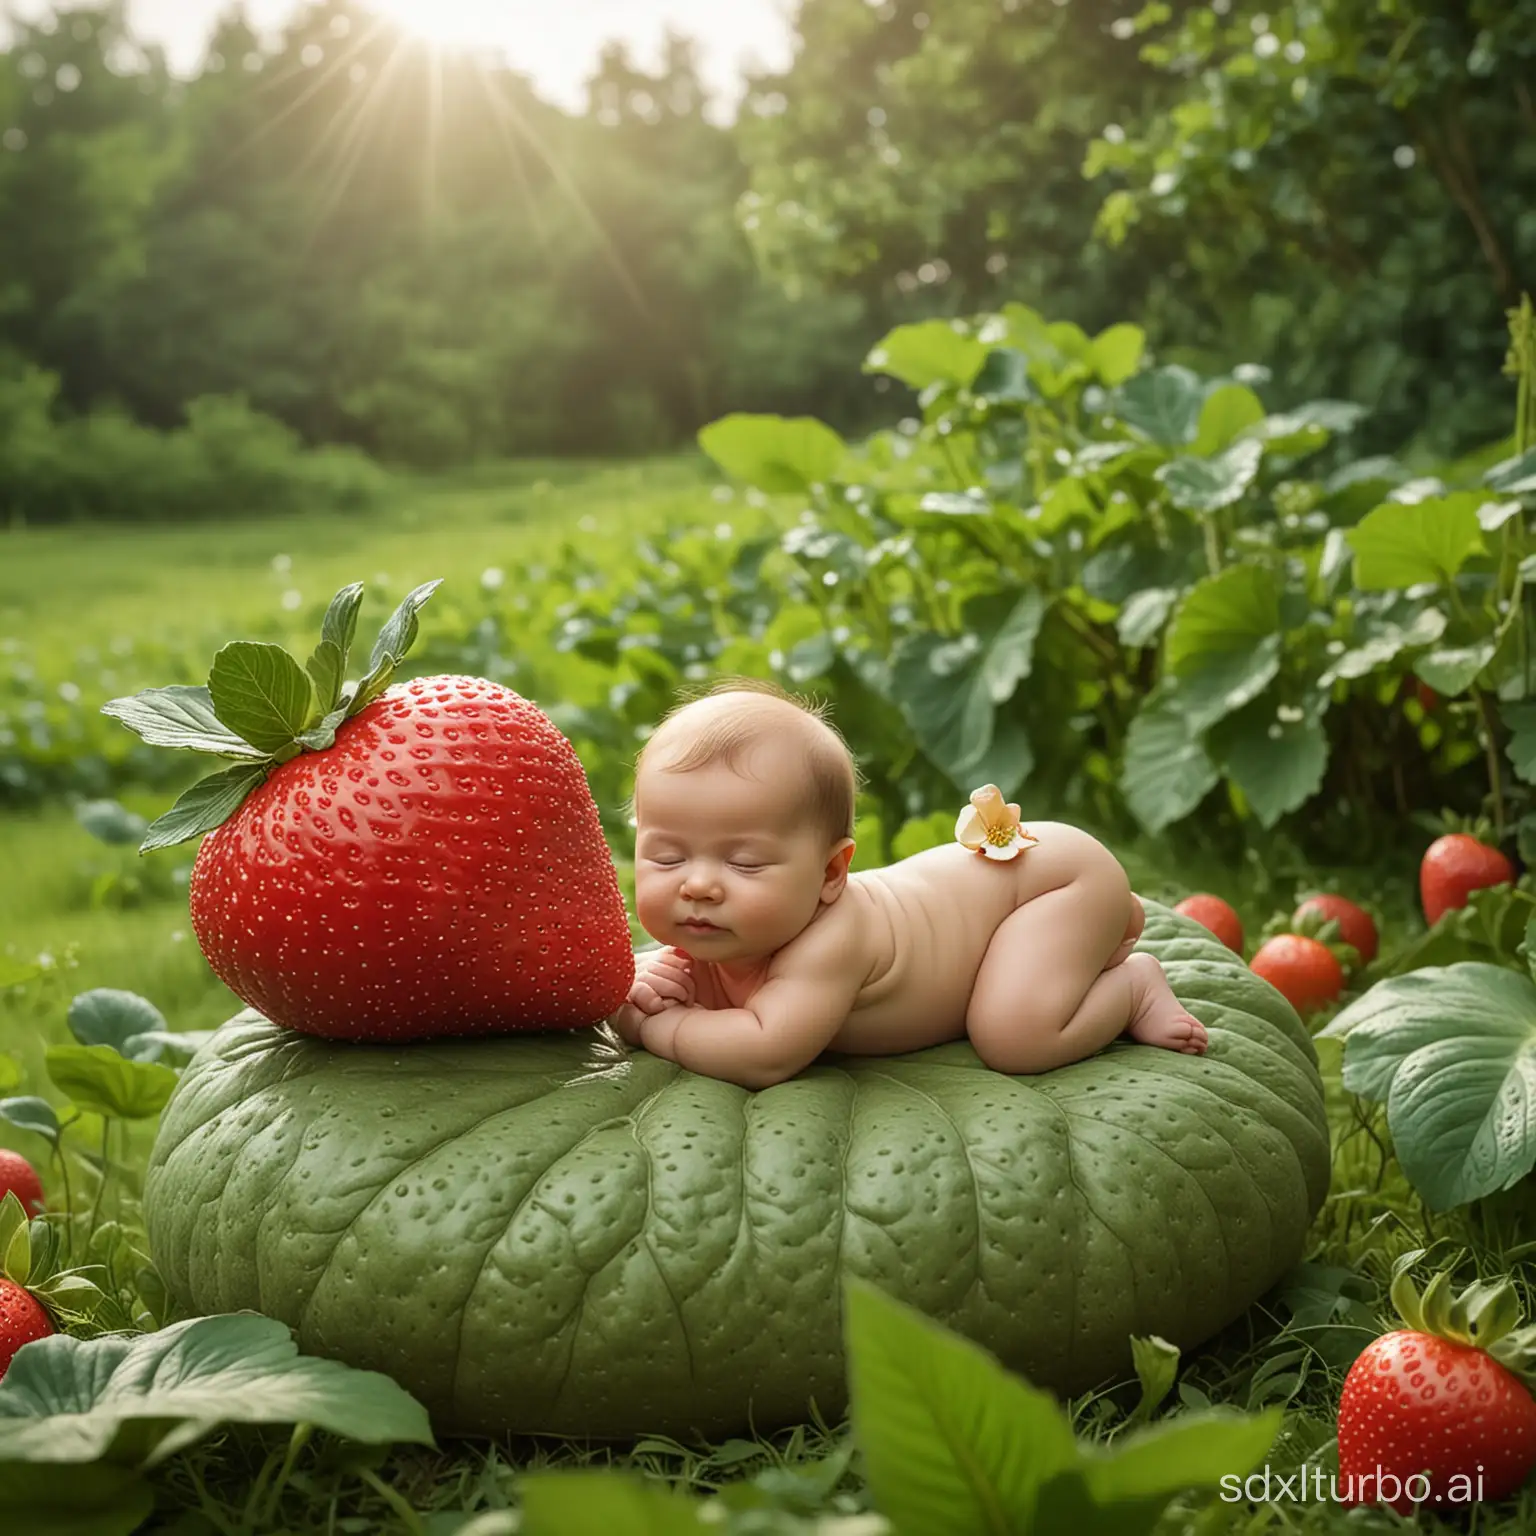 Tranquil-Baby-Resting-on-Giant-Strawberry-Sculpture-in-Enchanting-Meadow